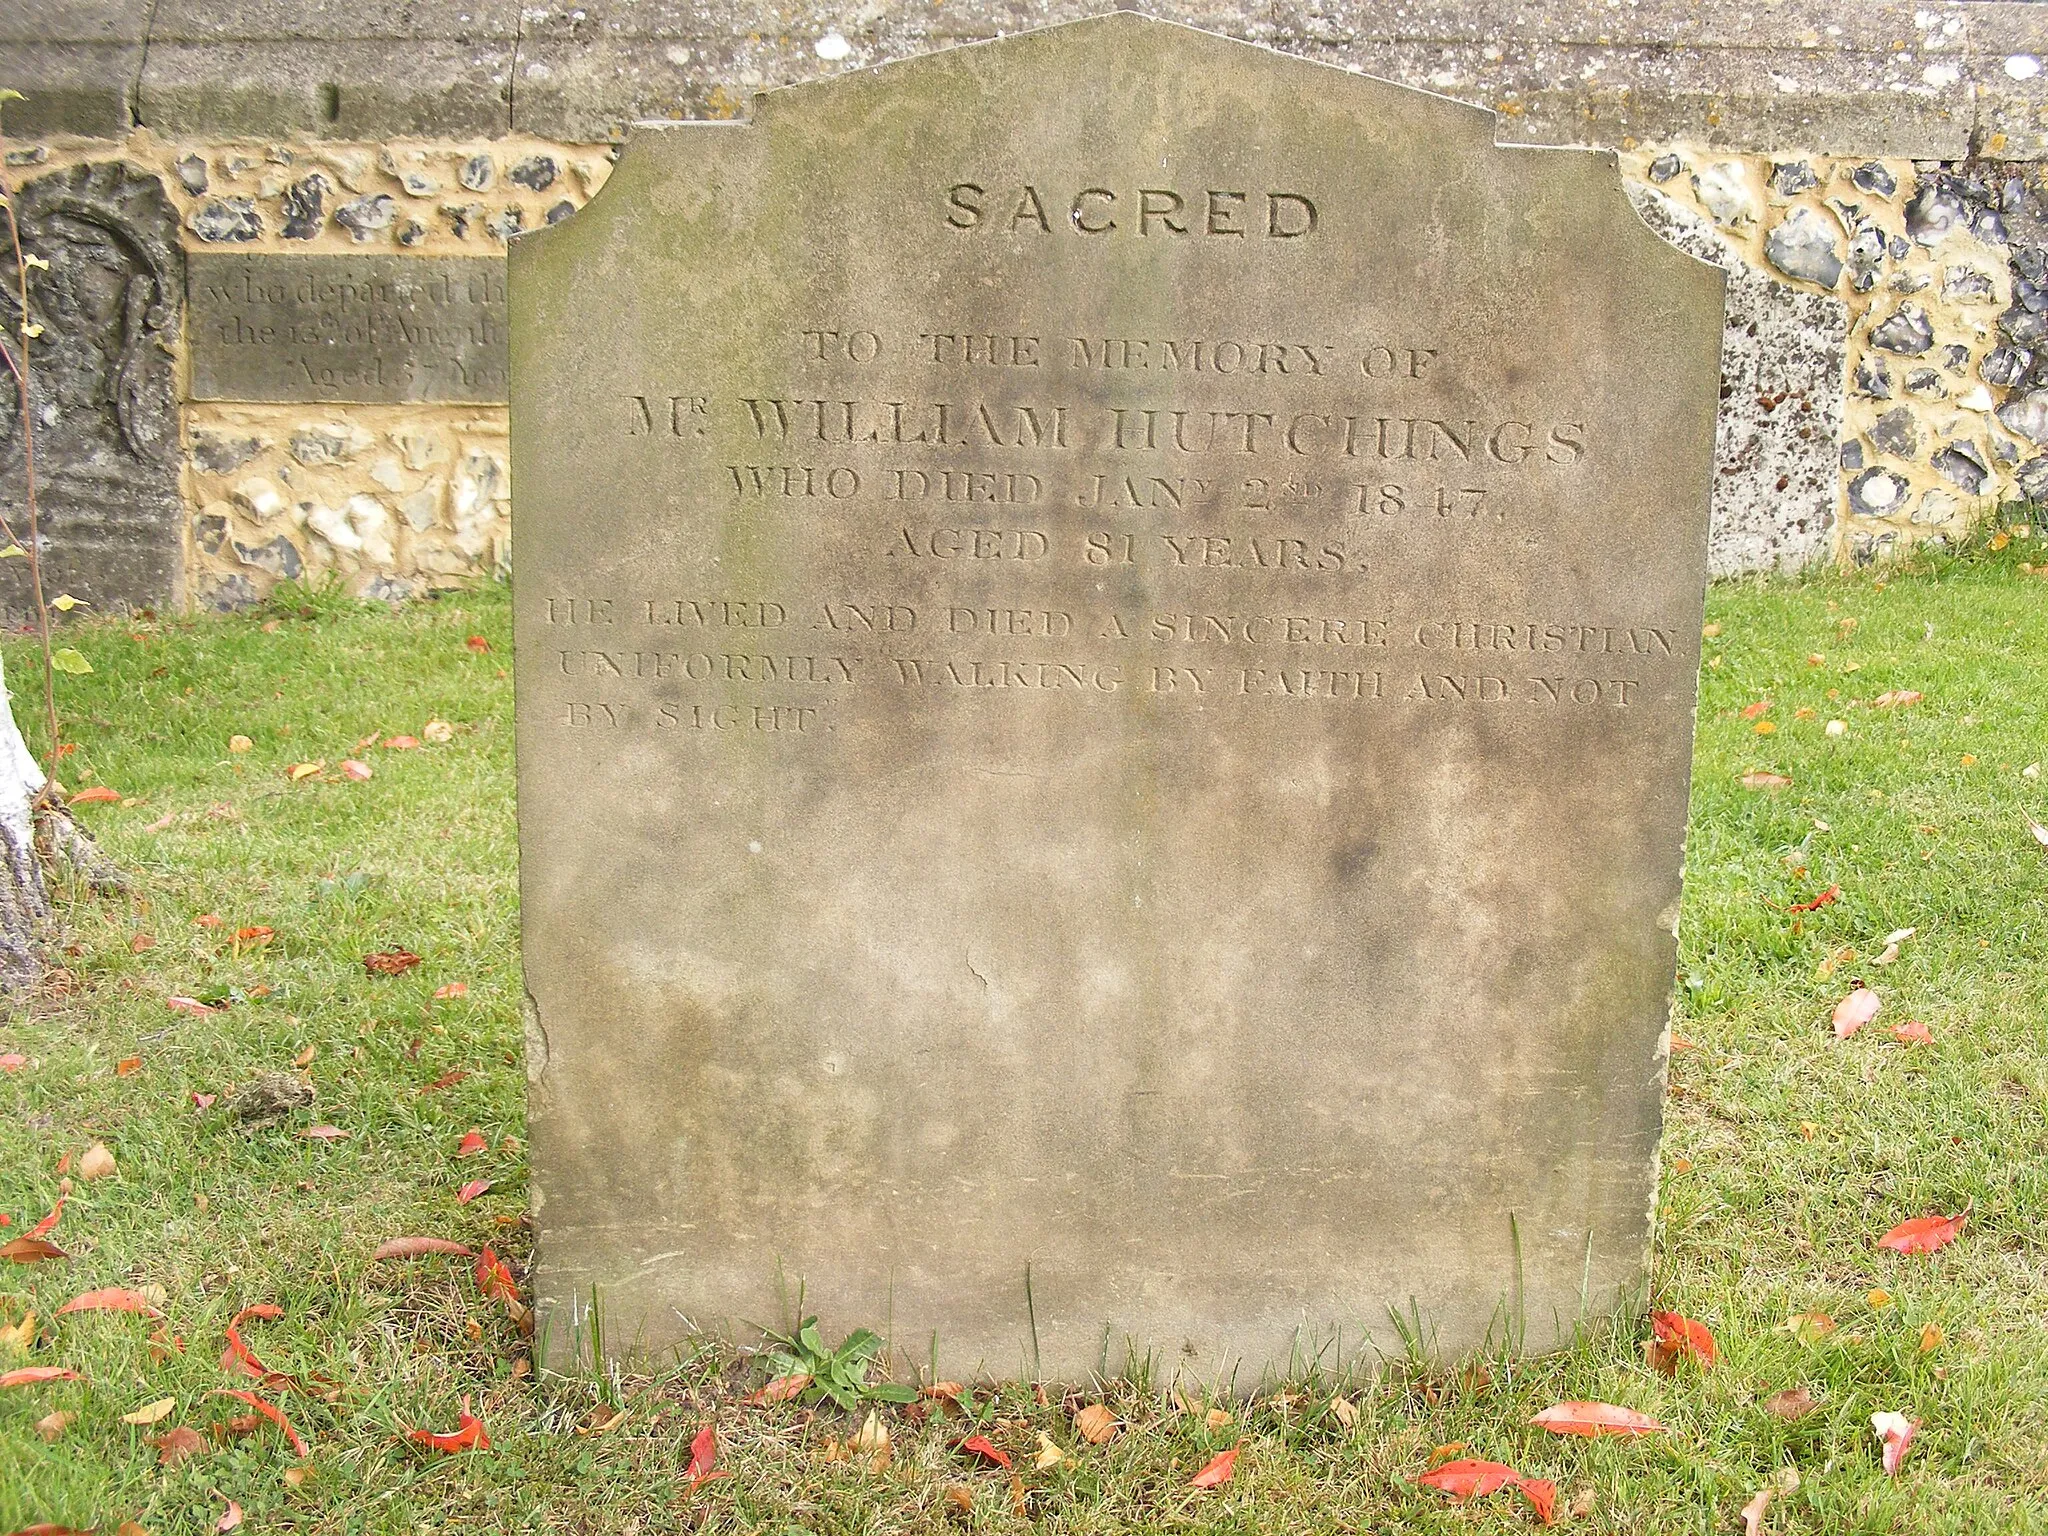 Photo showing: Gravestone, Havering-atte-Bower
SACRED to the memory of Mr William Hutchings, who died Jany 2nd 1847 aged 81 years.

He lived and died a sincere Christian unformly walking by faith not by sight